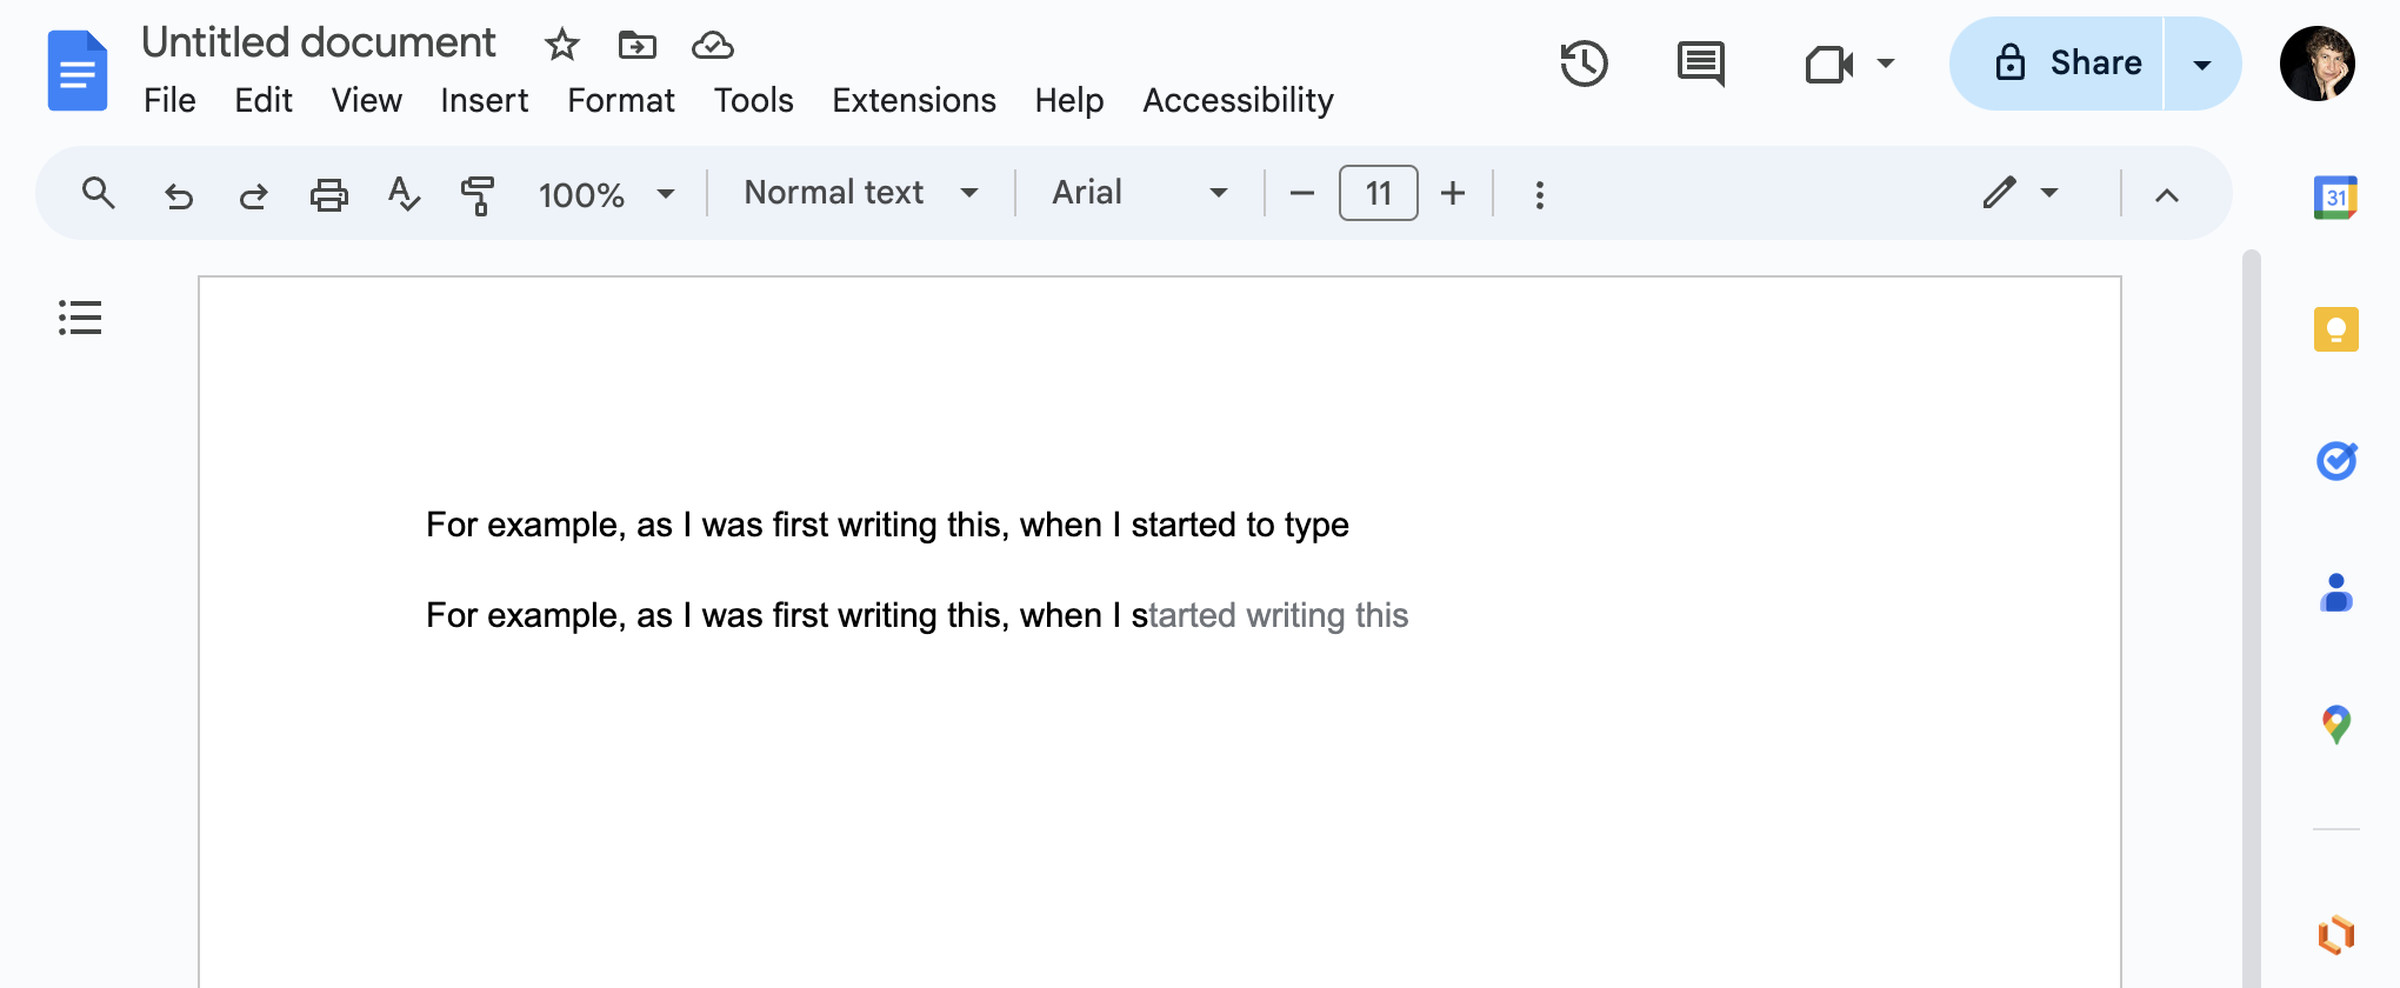 A Google Doc with two sentences, the first “For example, as I first writing this, when I started to type” the second “For example, as I was first writing this, when I started writing this.”